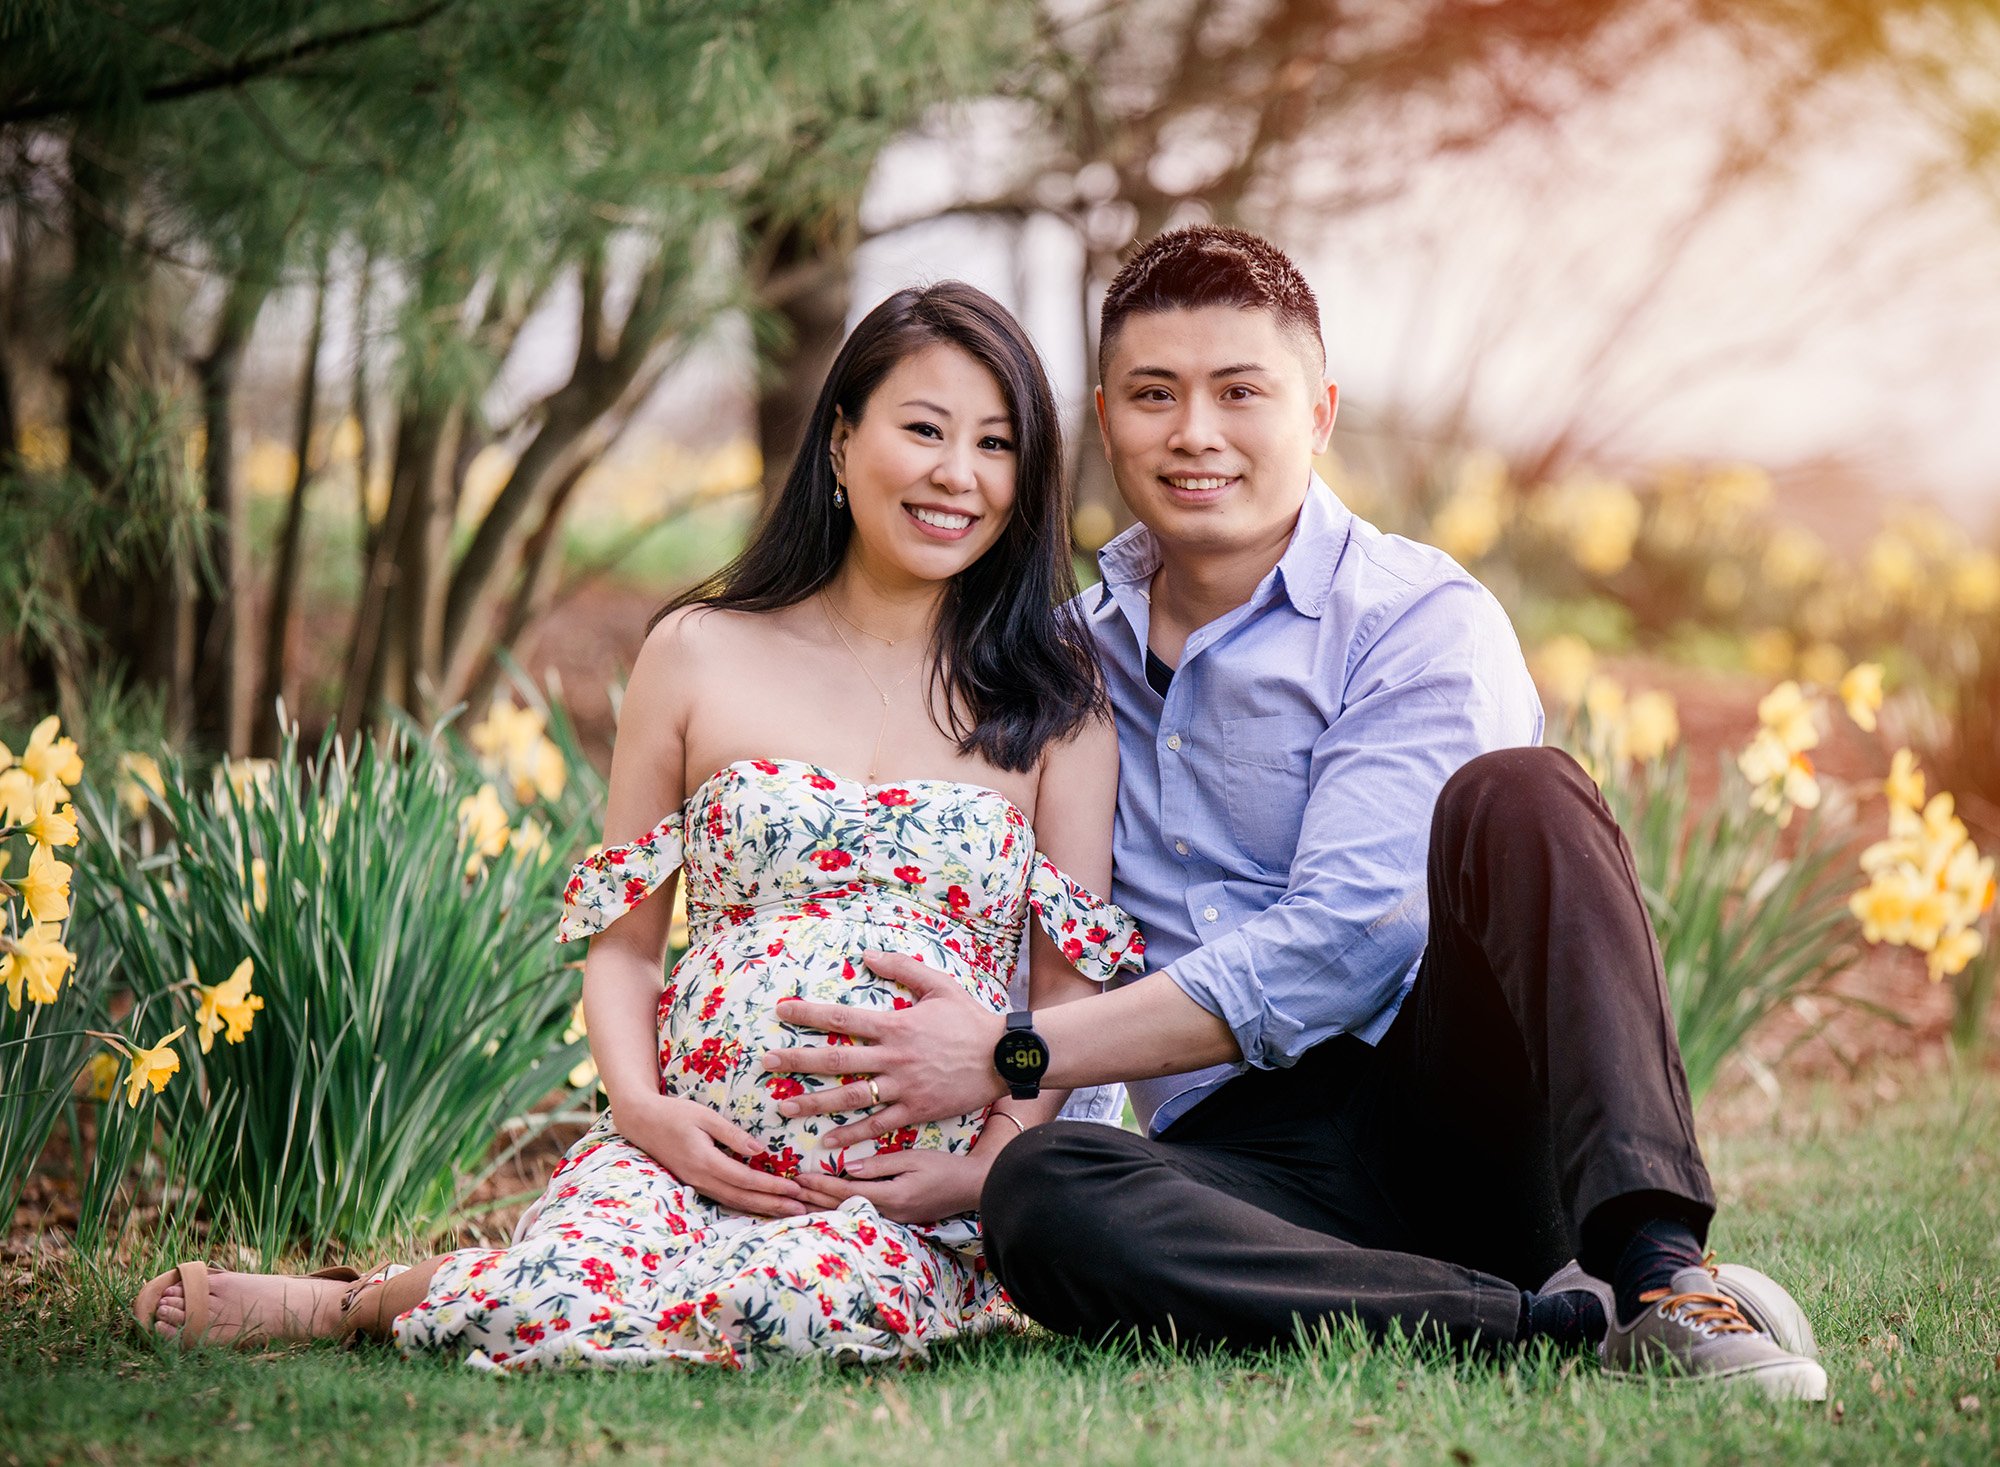 garden flower maternity photos pregnant woman in floral maternity dress sitting outside with partner